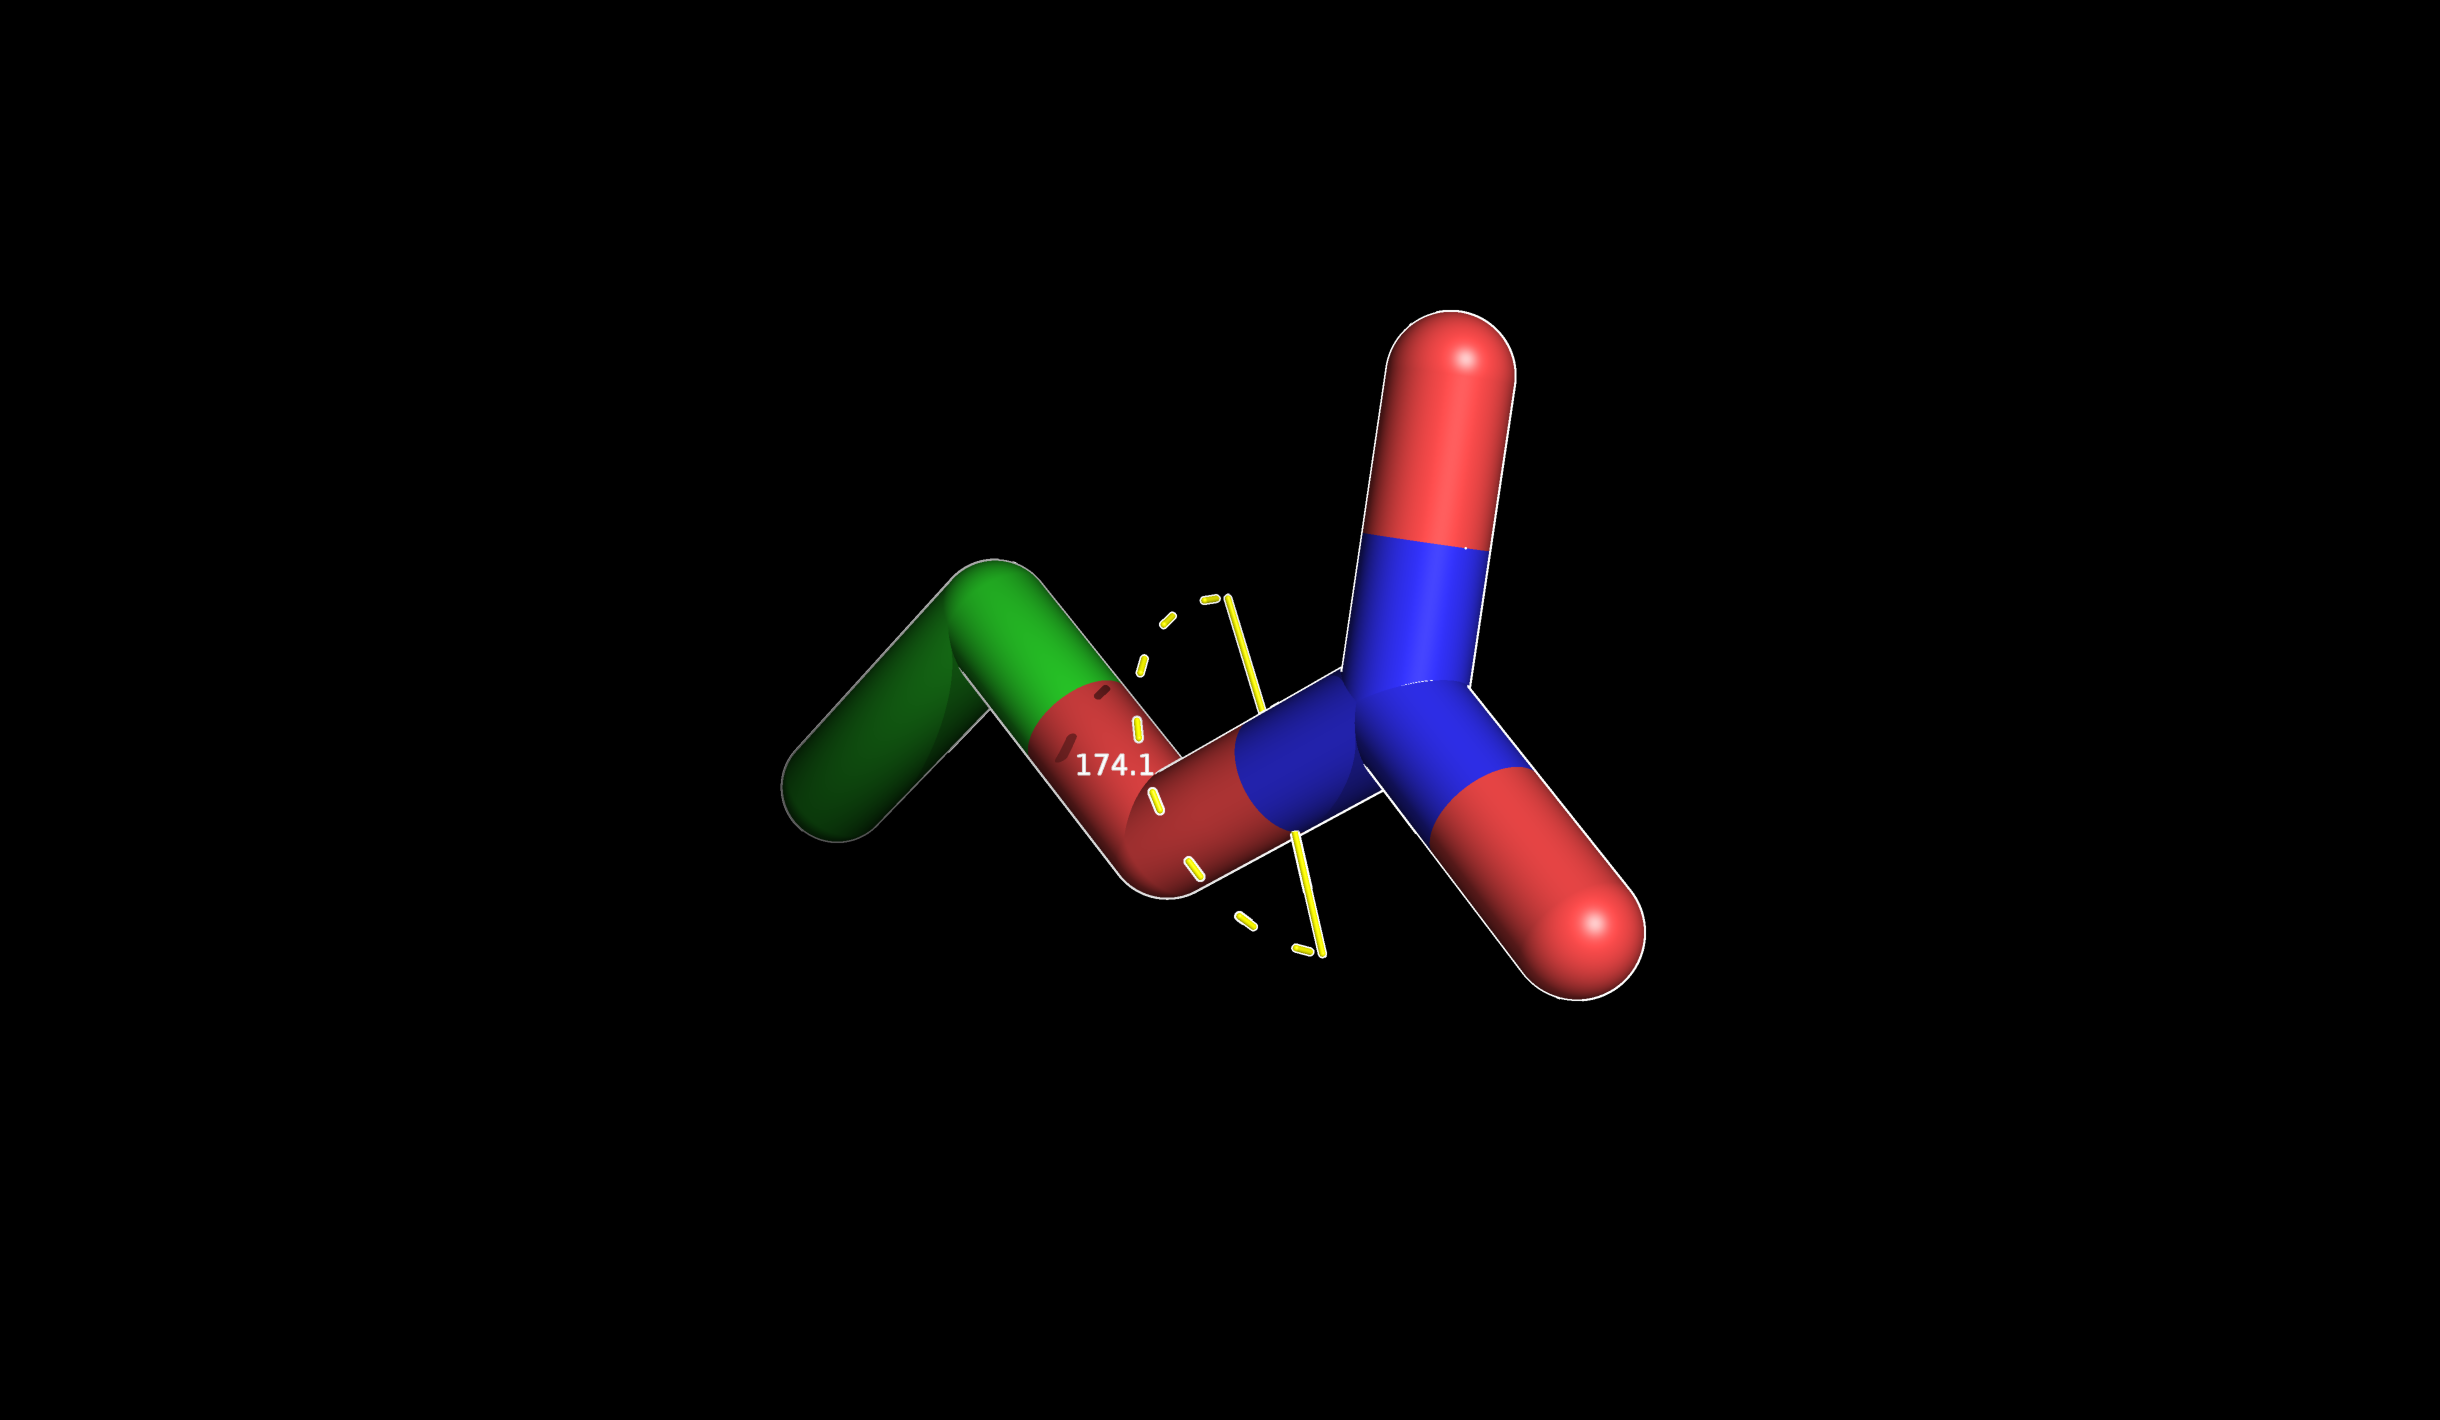 The torsional value between four atoms in a propane molecule displayed in PyMOL.